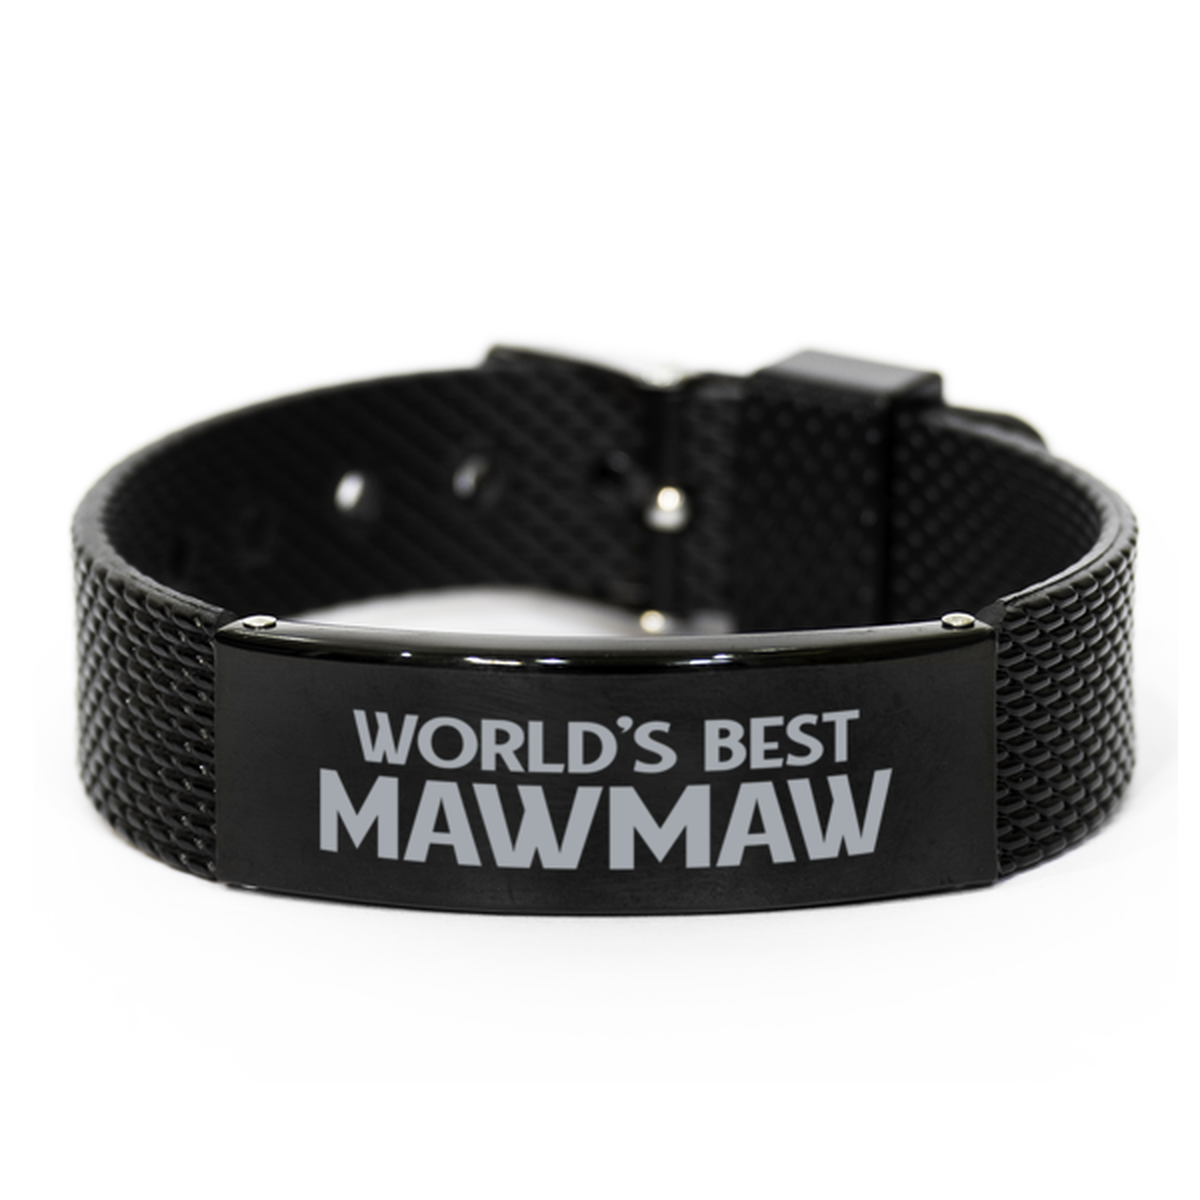 World's Best Mawmaw Gifts, Gag Engraved Bracelet For Mawmaw, Best Family Gifts For Women